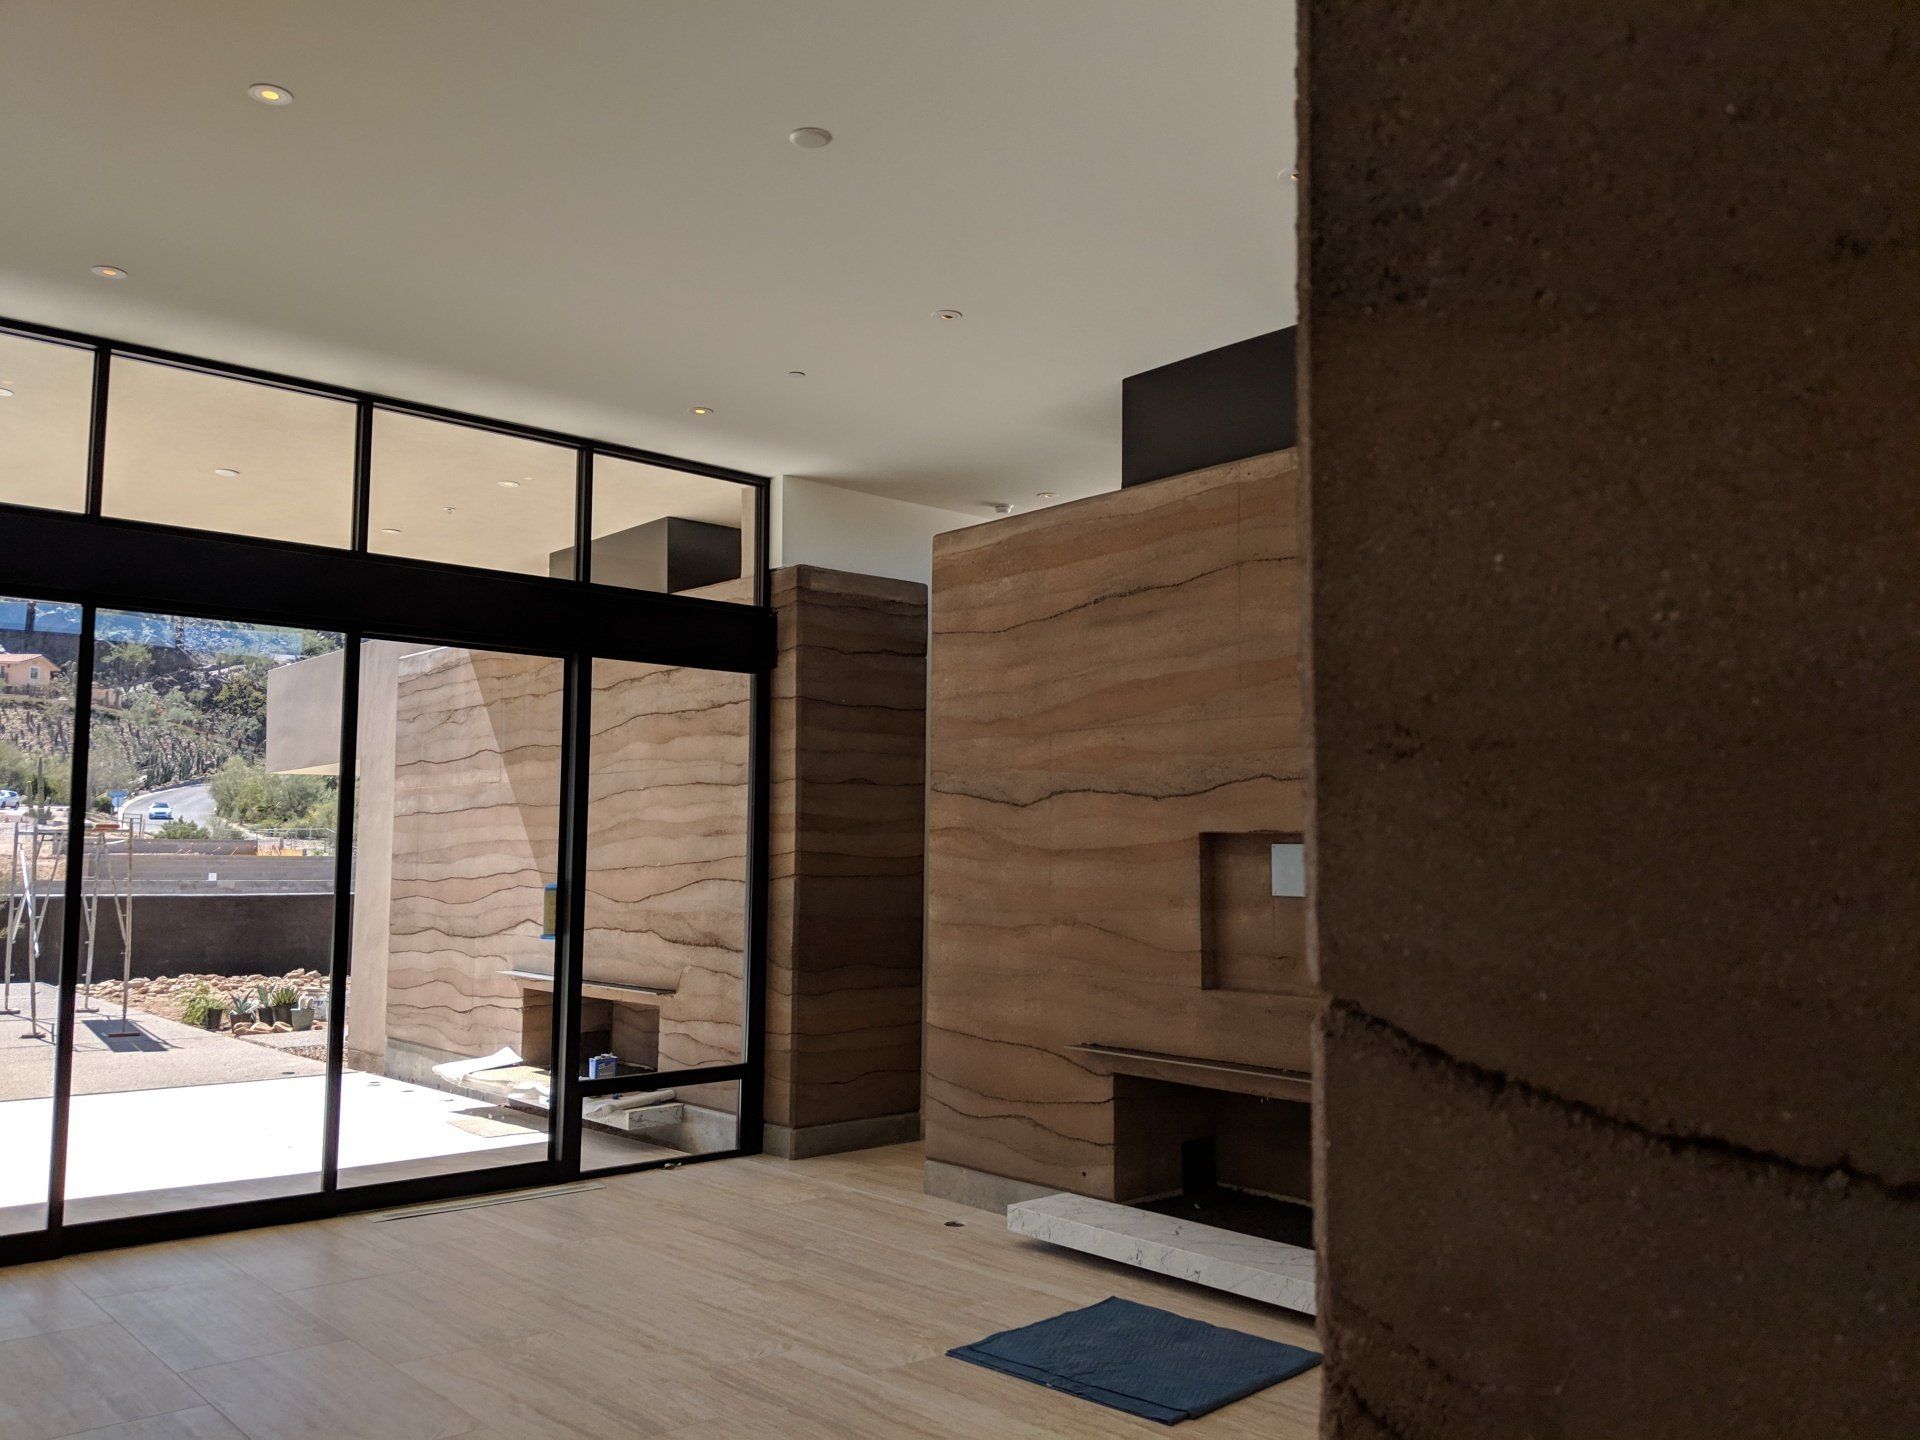 Living room with two rammed earth fireplaces, one indoors, and one outdoors -separated by floor-to-ceiling  glass wall.